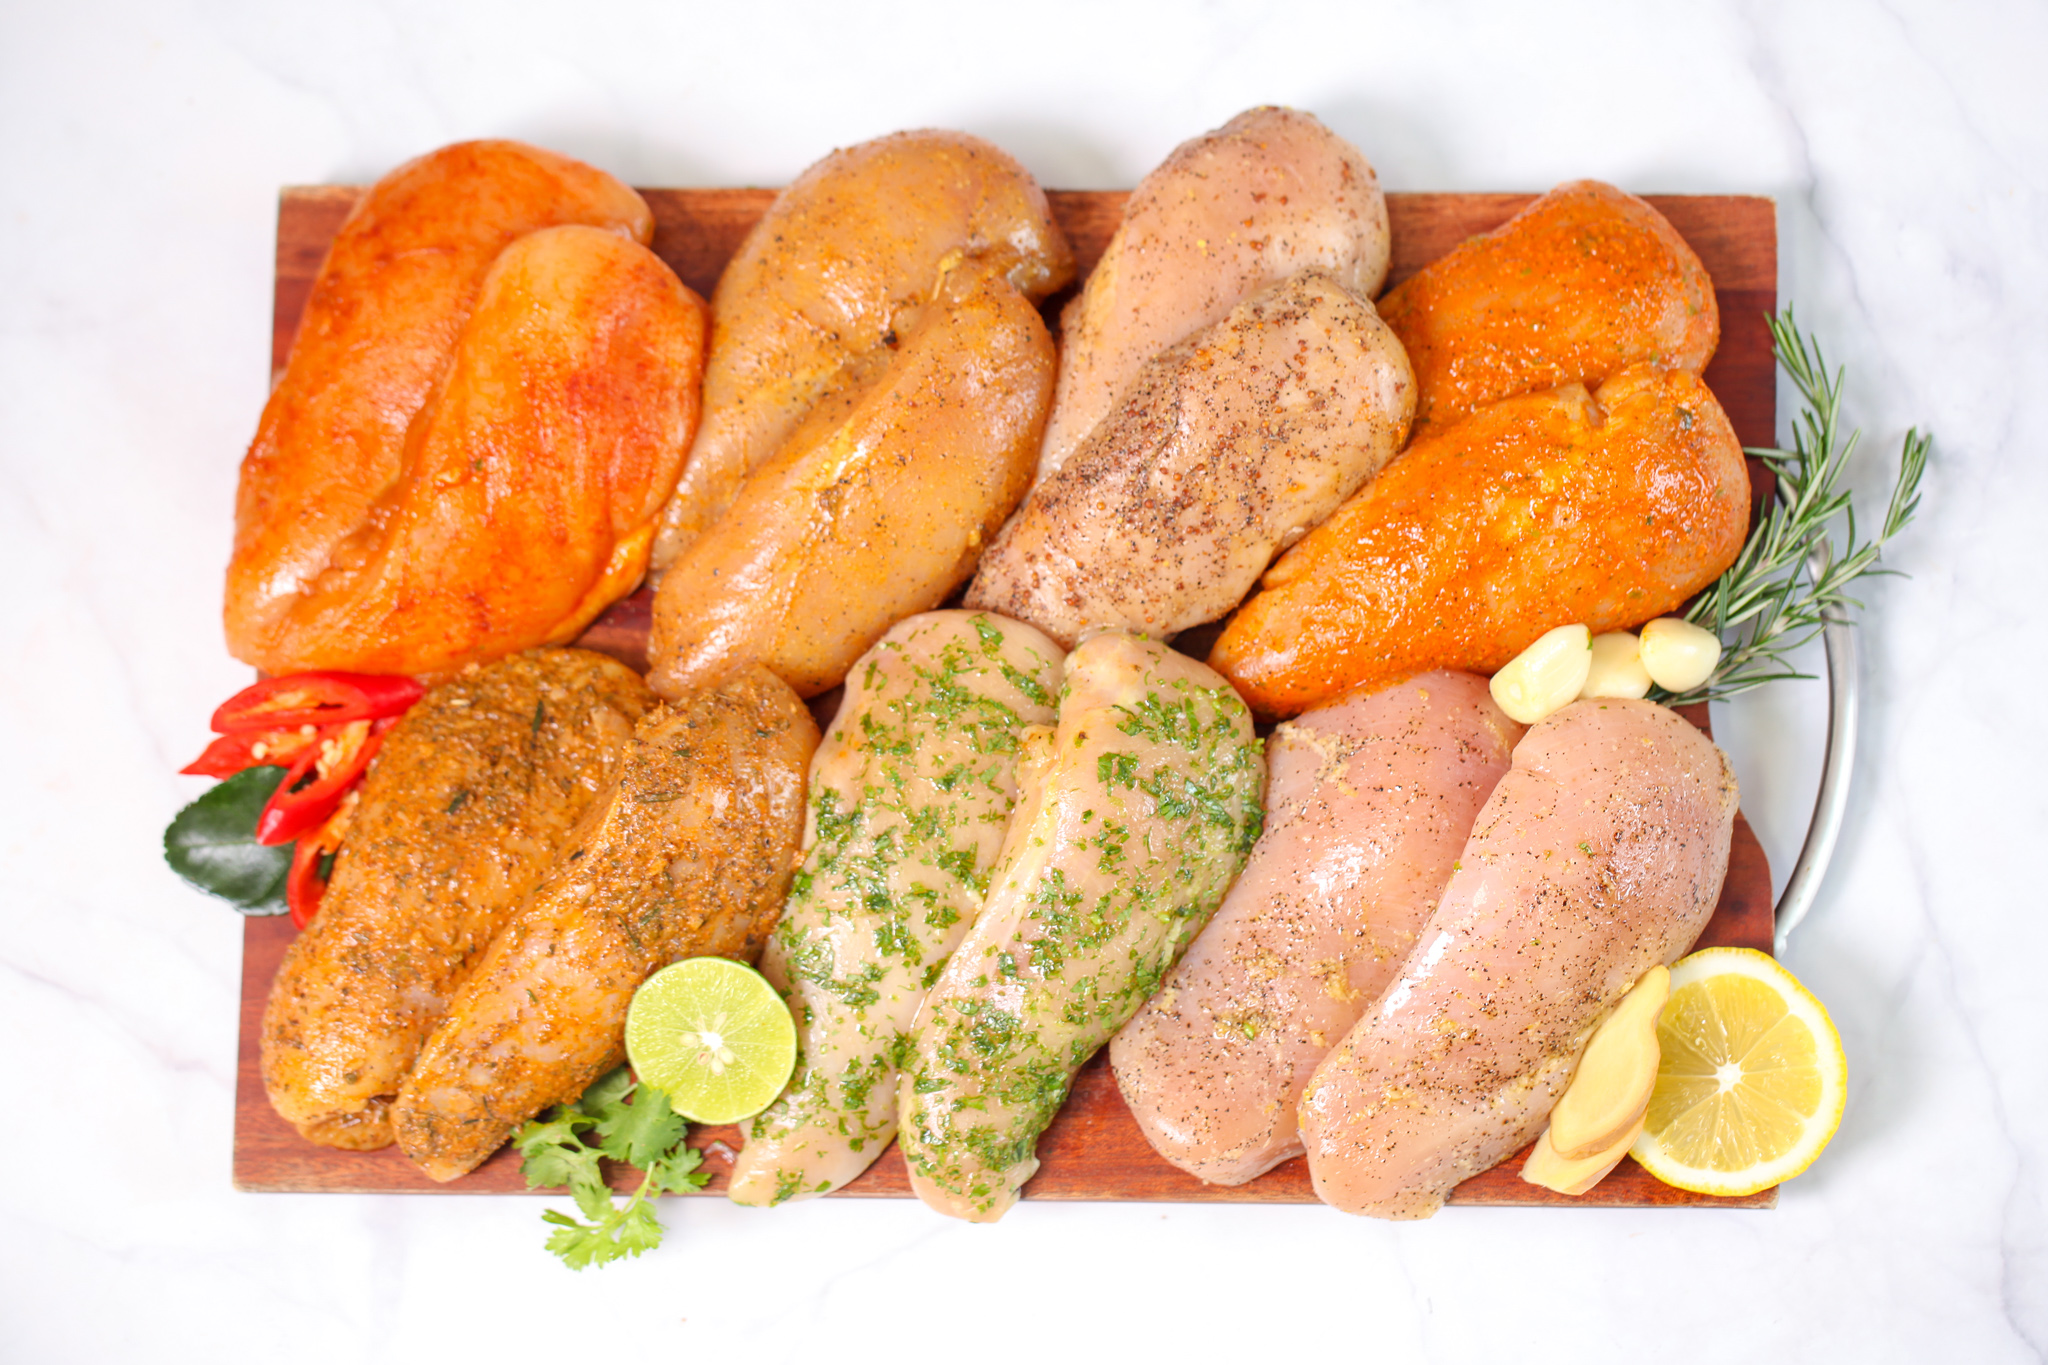 7 Flavors of Marinated Pasture-fed Chicken Breast